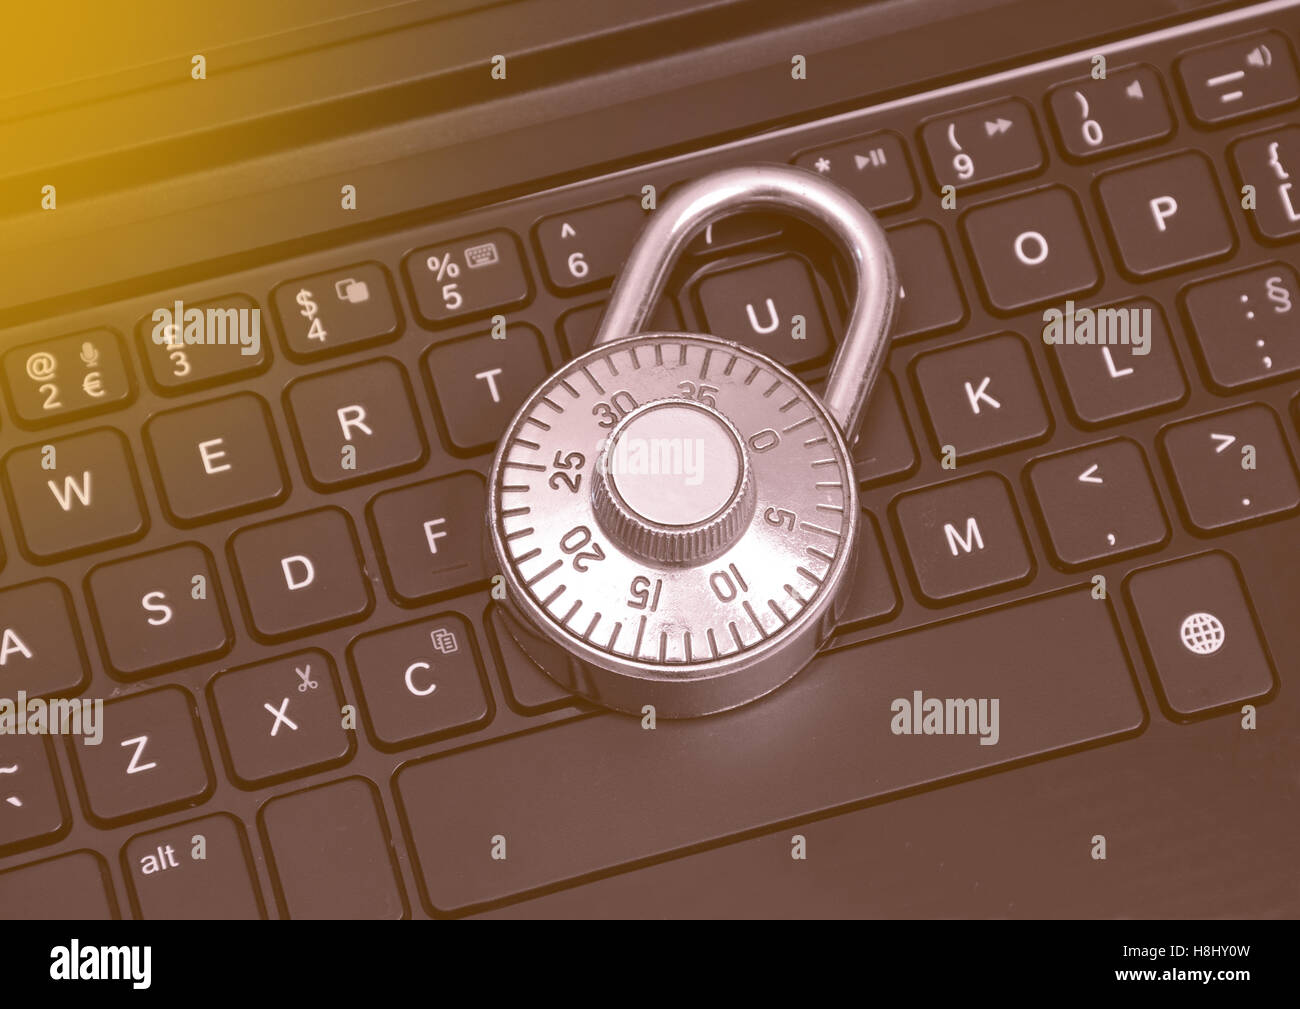 Computer security concept with a closed padlock on the keyboard. Stock Photo